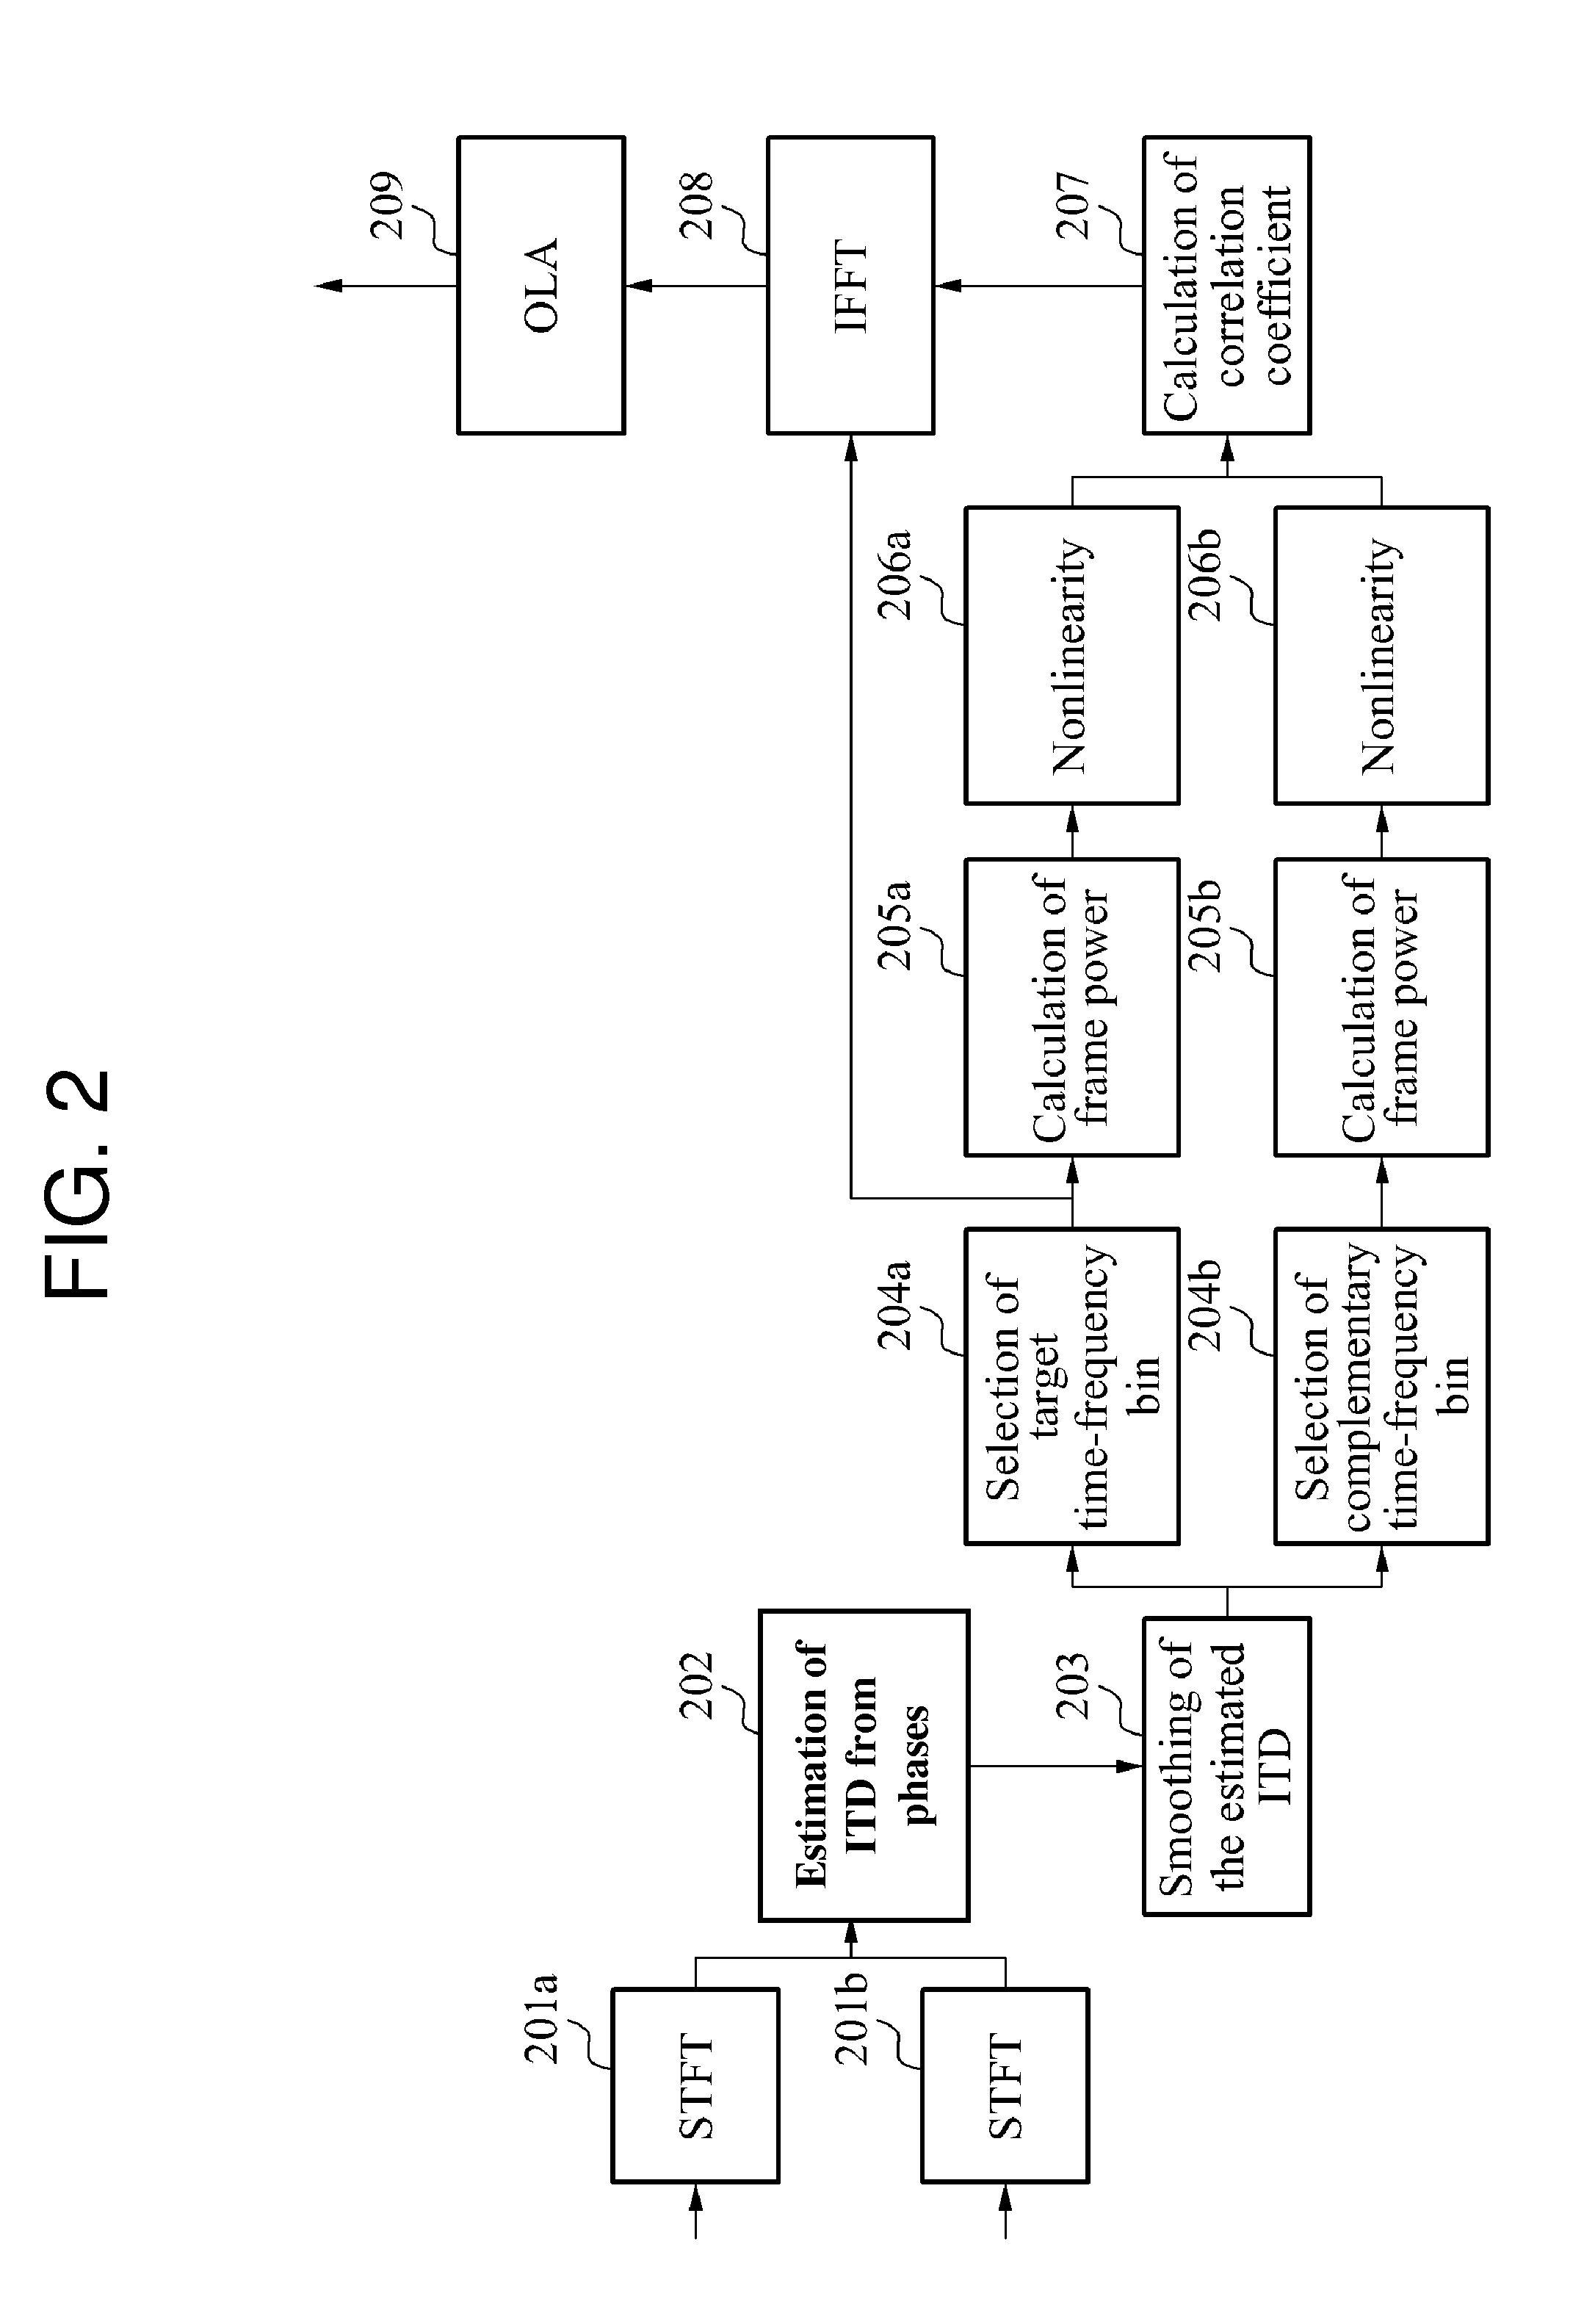 Signal separation system and method for automatically selecting threshold to separate sound sources